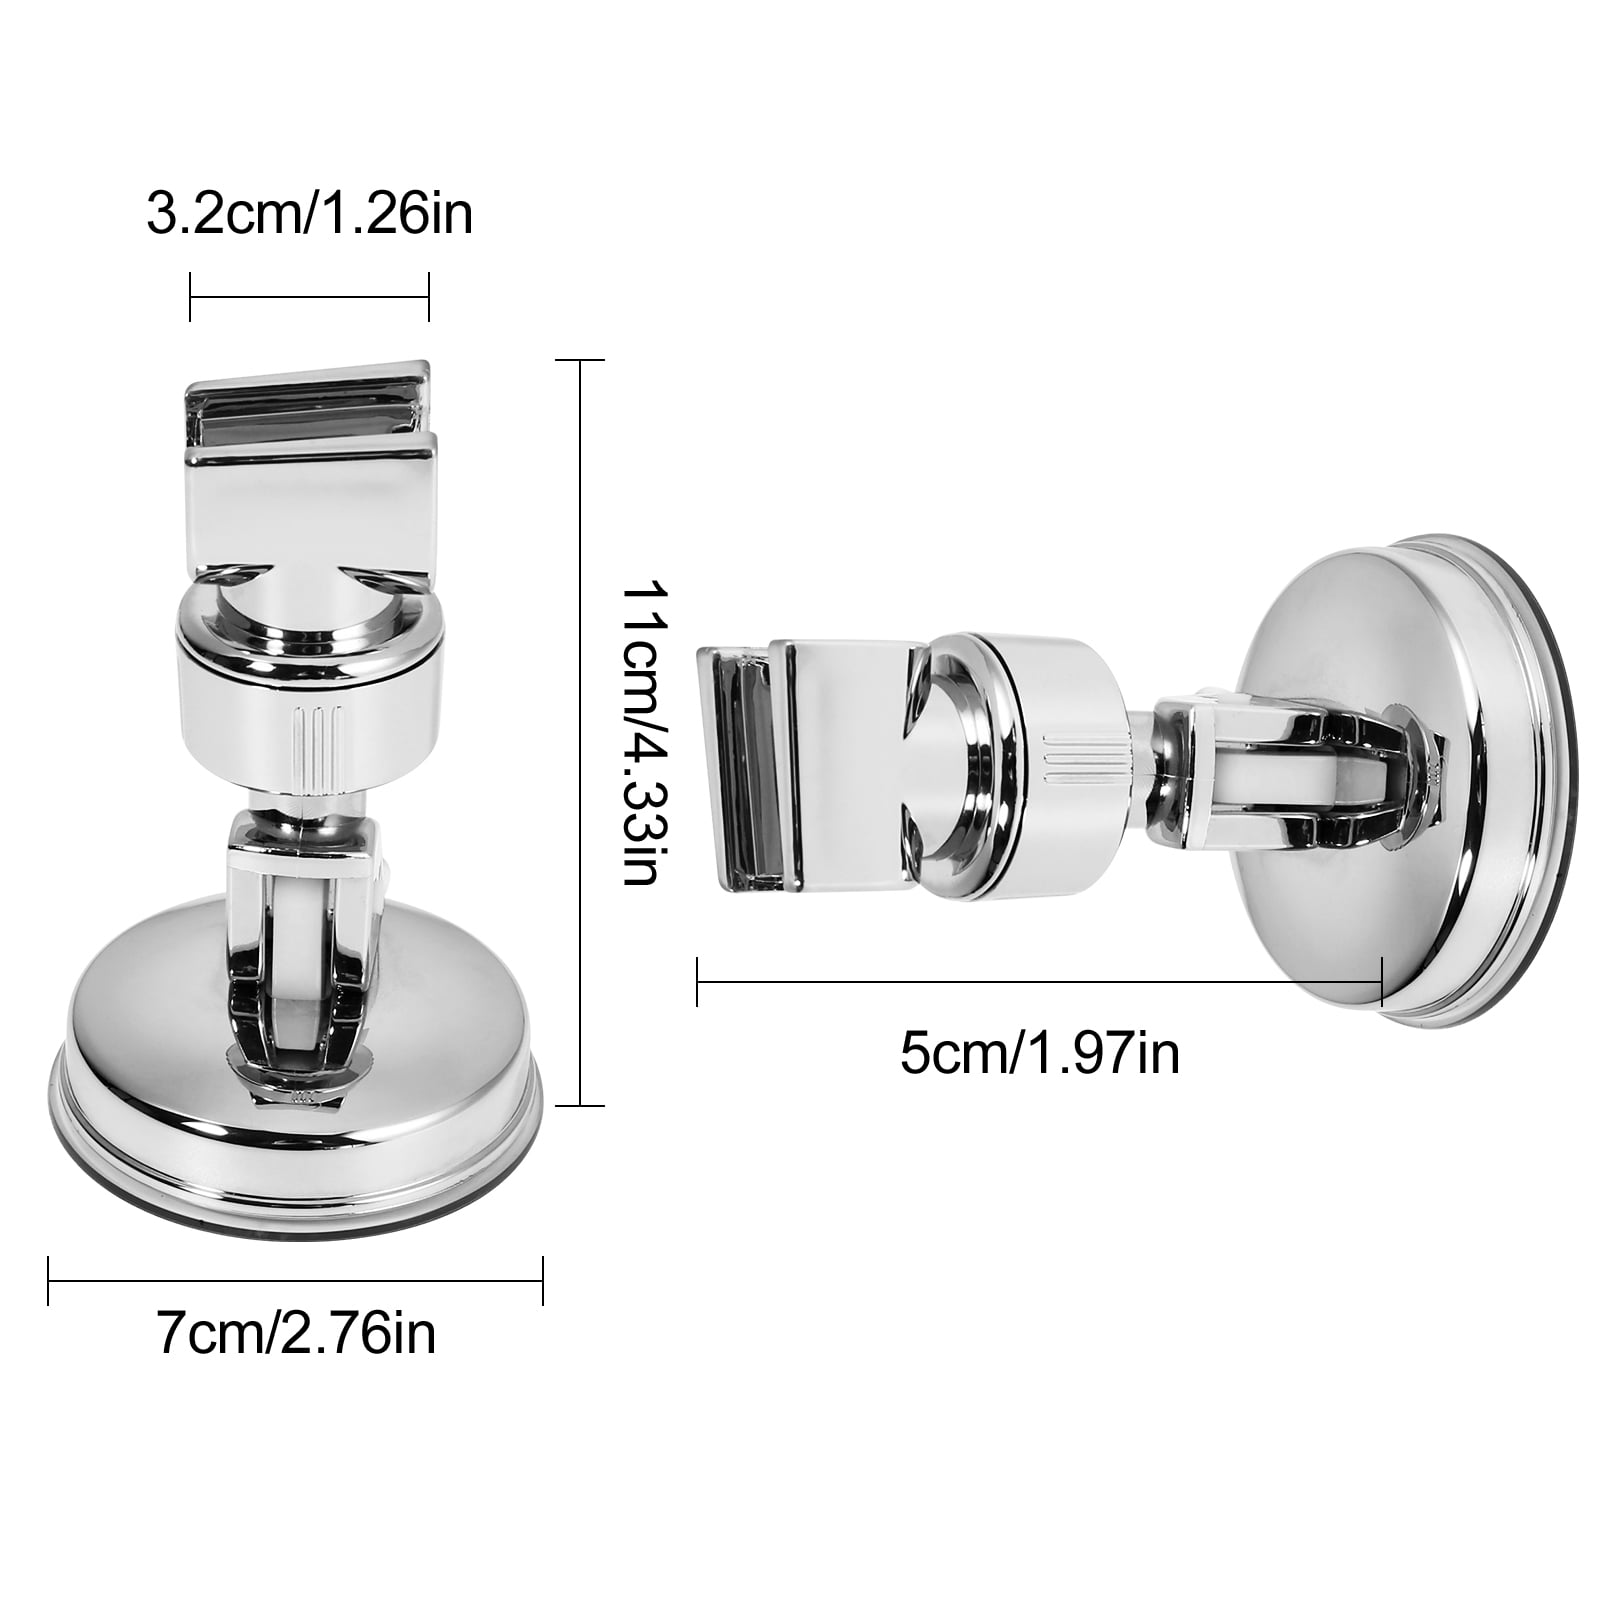 Everso 1Pcs Adjustable Suction-Cup Shower Head Holder, Shower Head Holder, Bathroom Suction-Cup Shower Head Holder, No-perforation, Chrome Plating